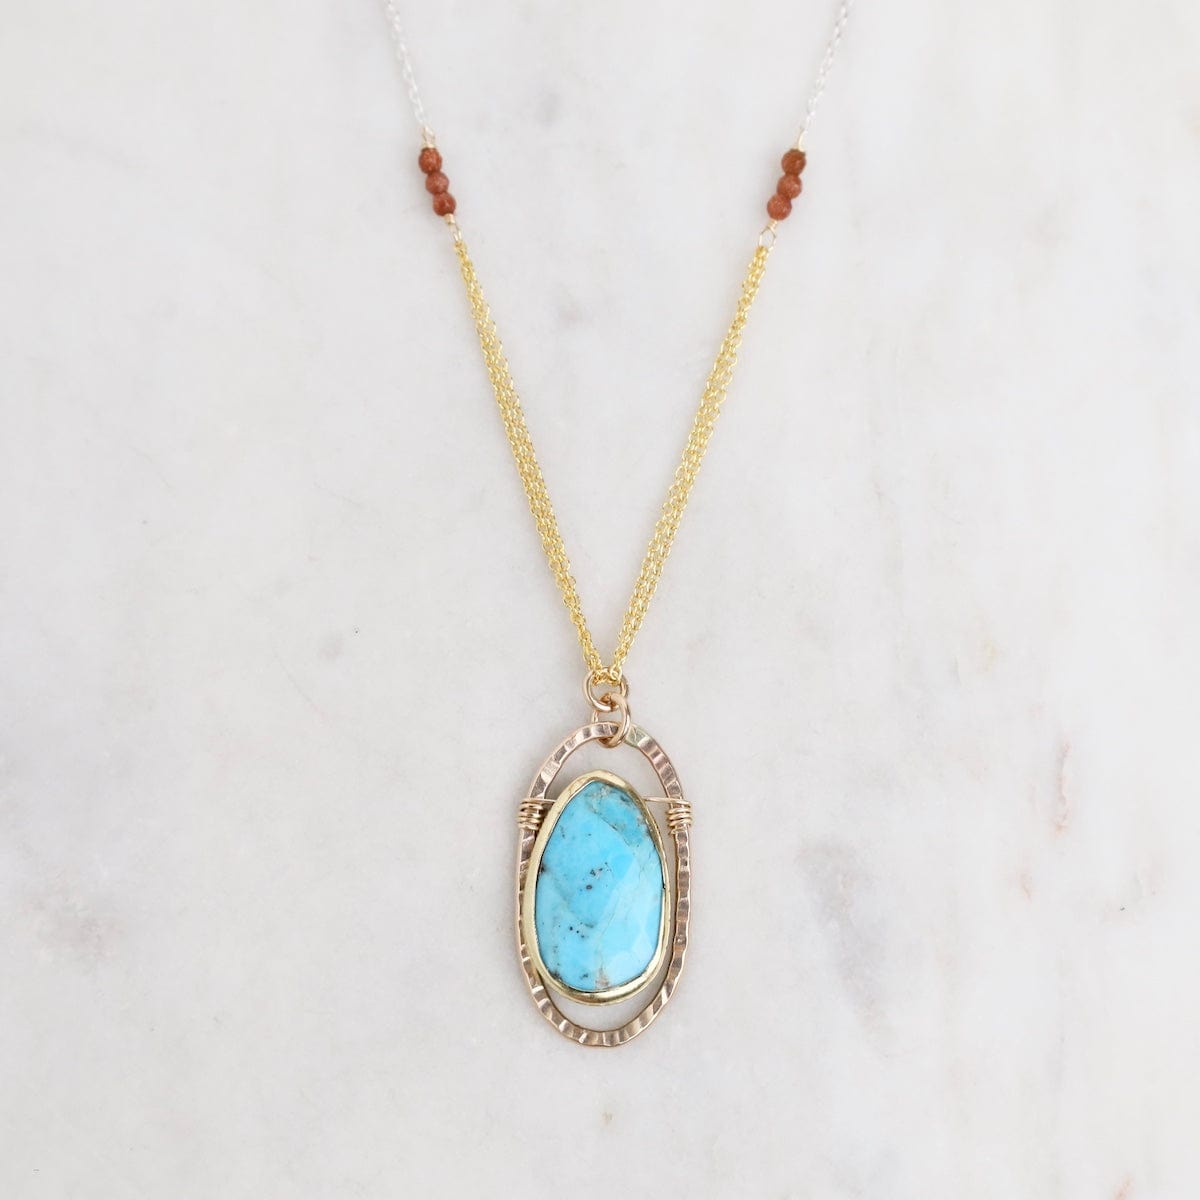 NKL-GF Turquoise & Goldstone Oval Pendant Necklace